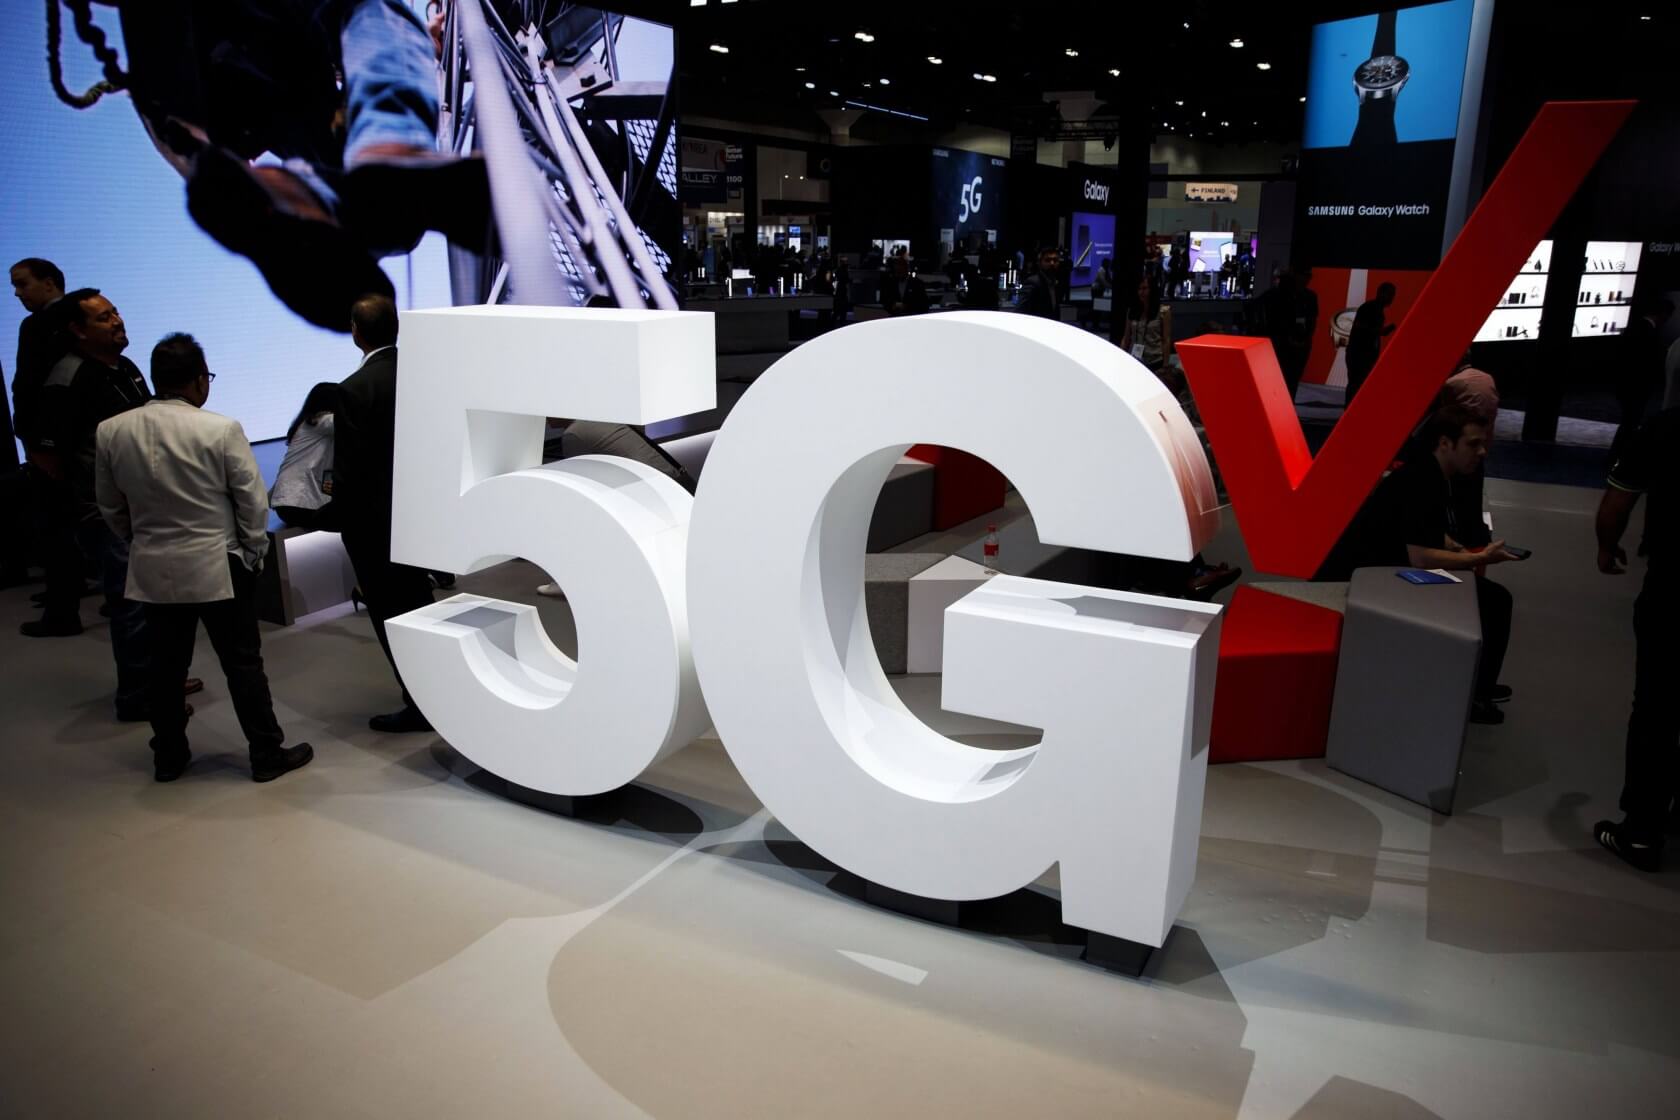 Verizon's 5G network can only cover 'certain seating areas' in a basketball stadium